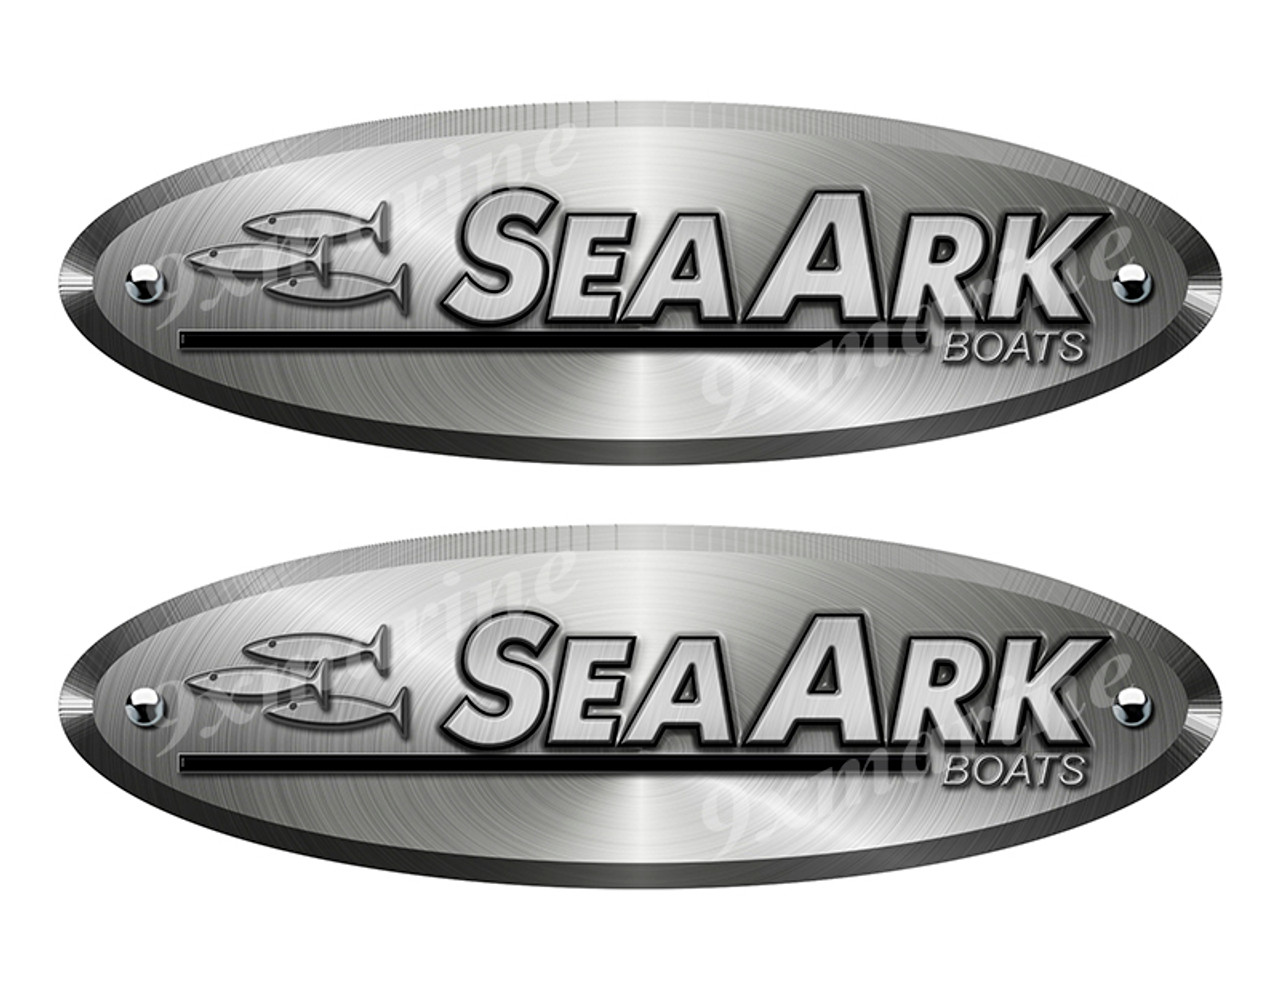 2 Sea Ark Oval Remastered Stickers. Brushed Metal Style - 10" long